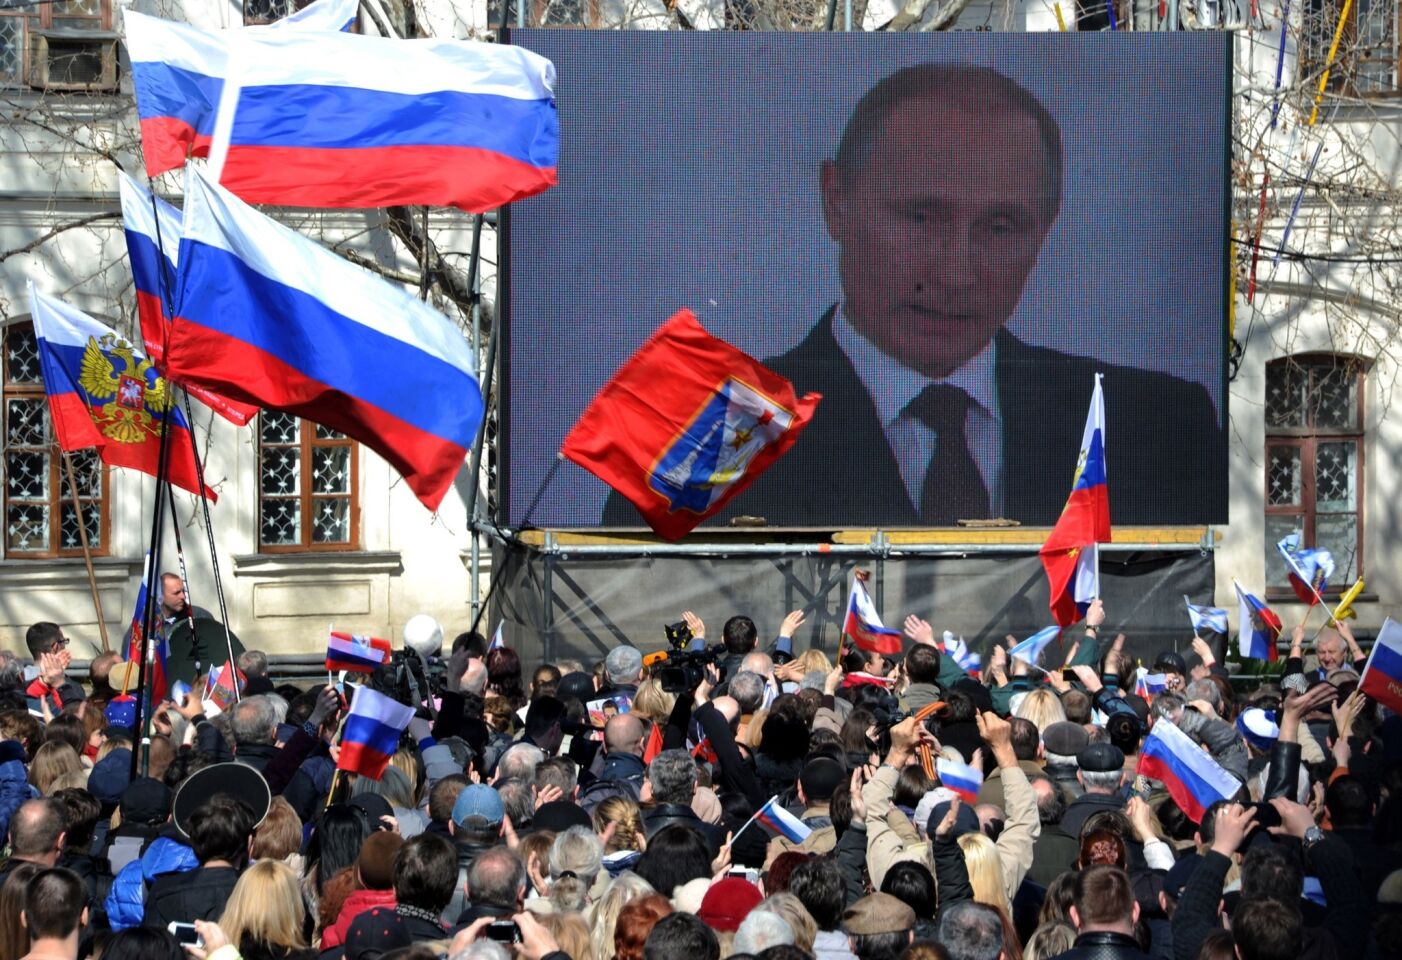 People wave flags as they watch Russian President Vladimir Putin deliver a speech in the Crimean city of Sevastopol.